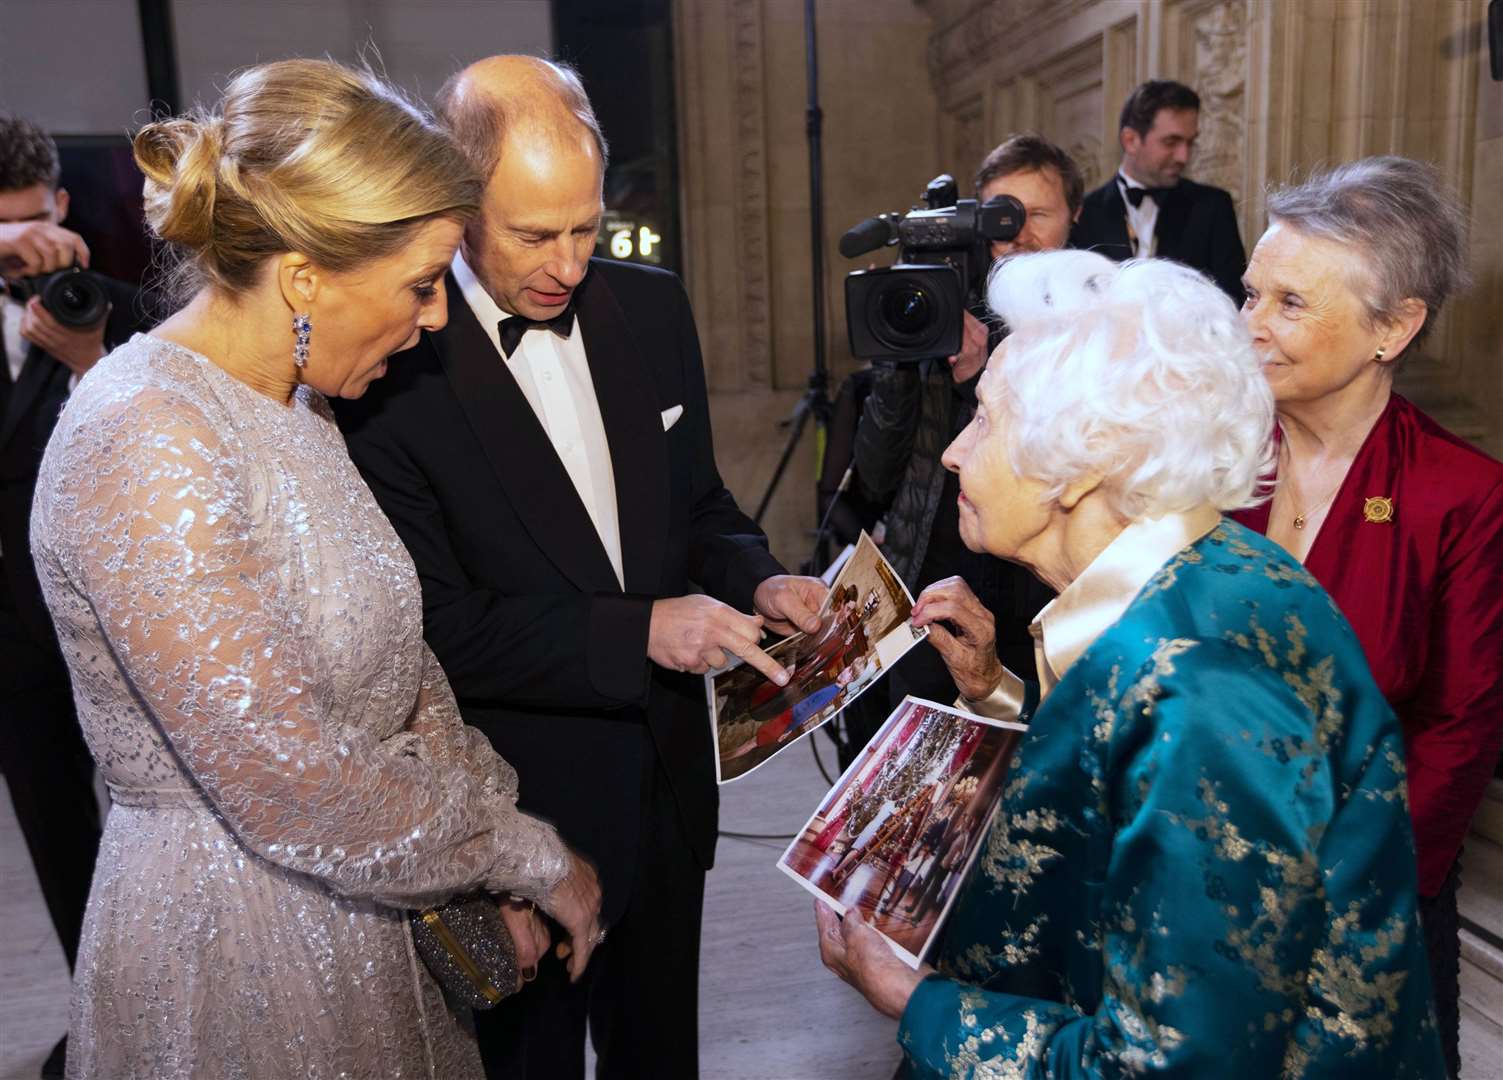 The Earl and Countess of Wessex meet Joan Williams, ex-royal photographer, as they attend the Royal Variety Performance at the Royal Albert Hall (David Parry/PA)